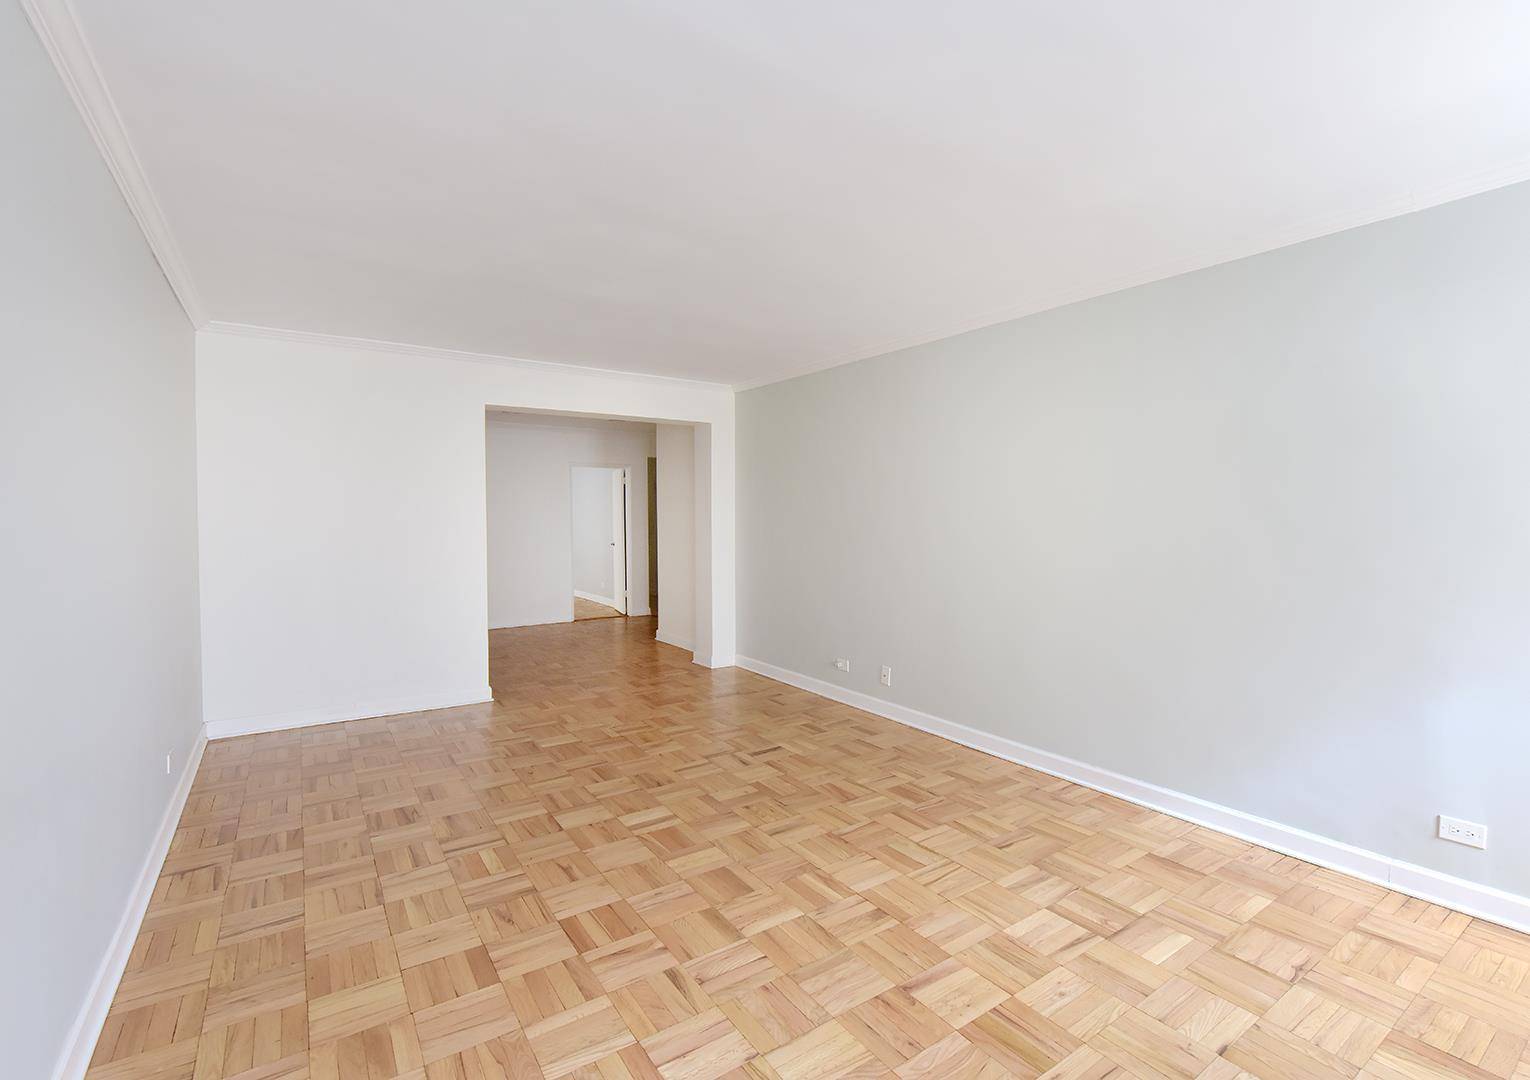 Spacious 3 bedroom 1. 5 bath with Renovated Kitchen and Bathrooms, and Refinished Parquet Floors.